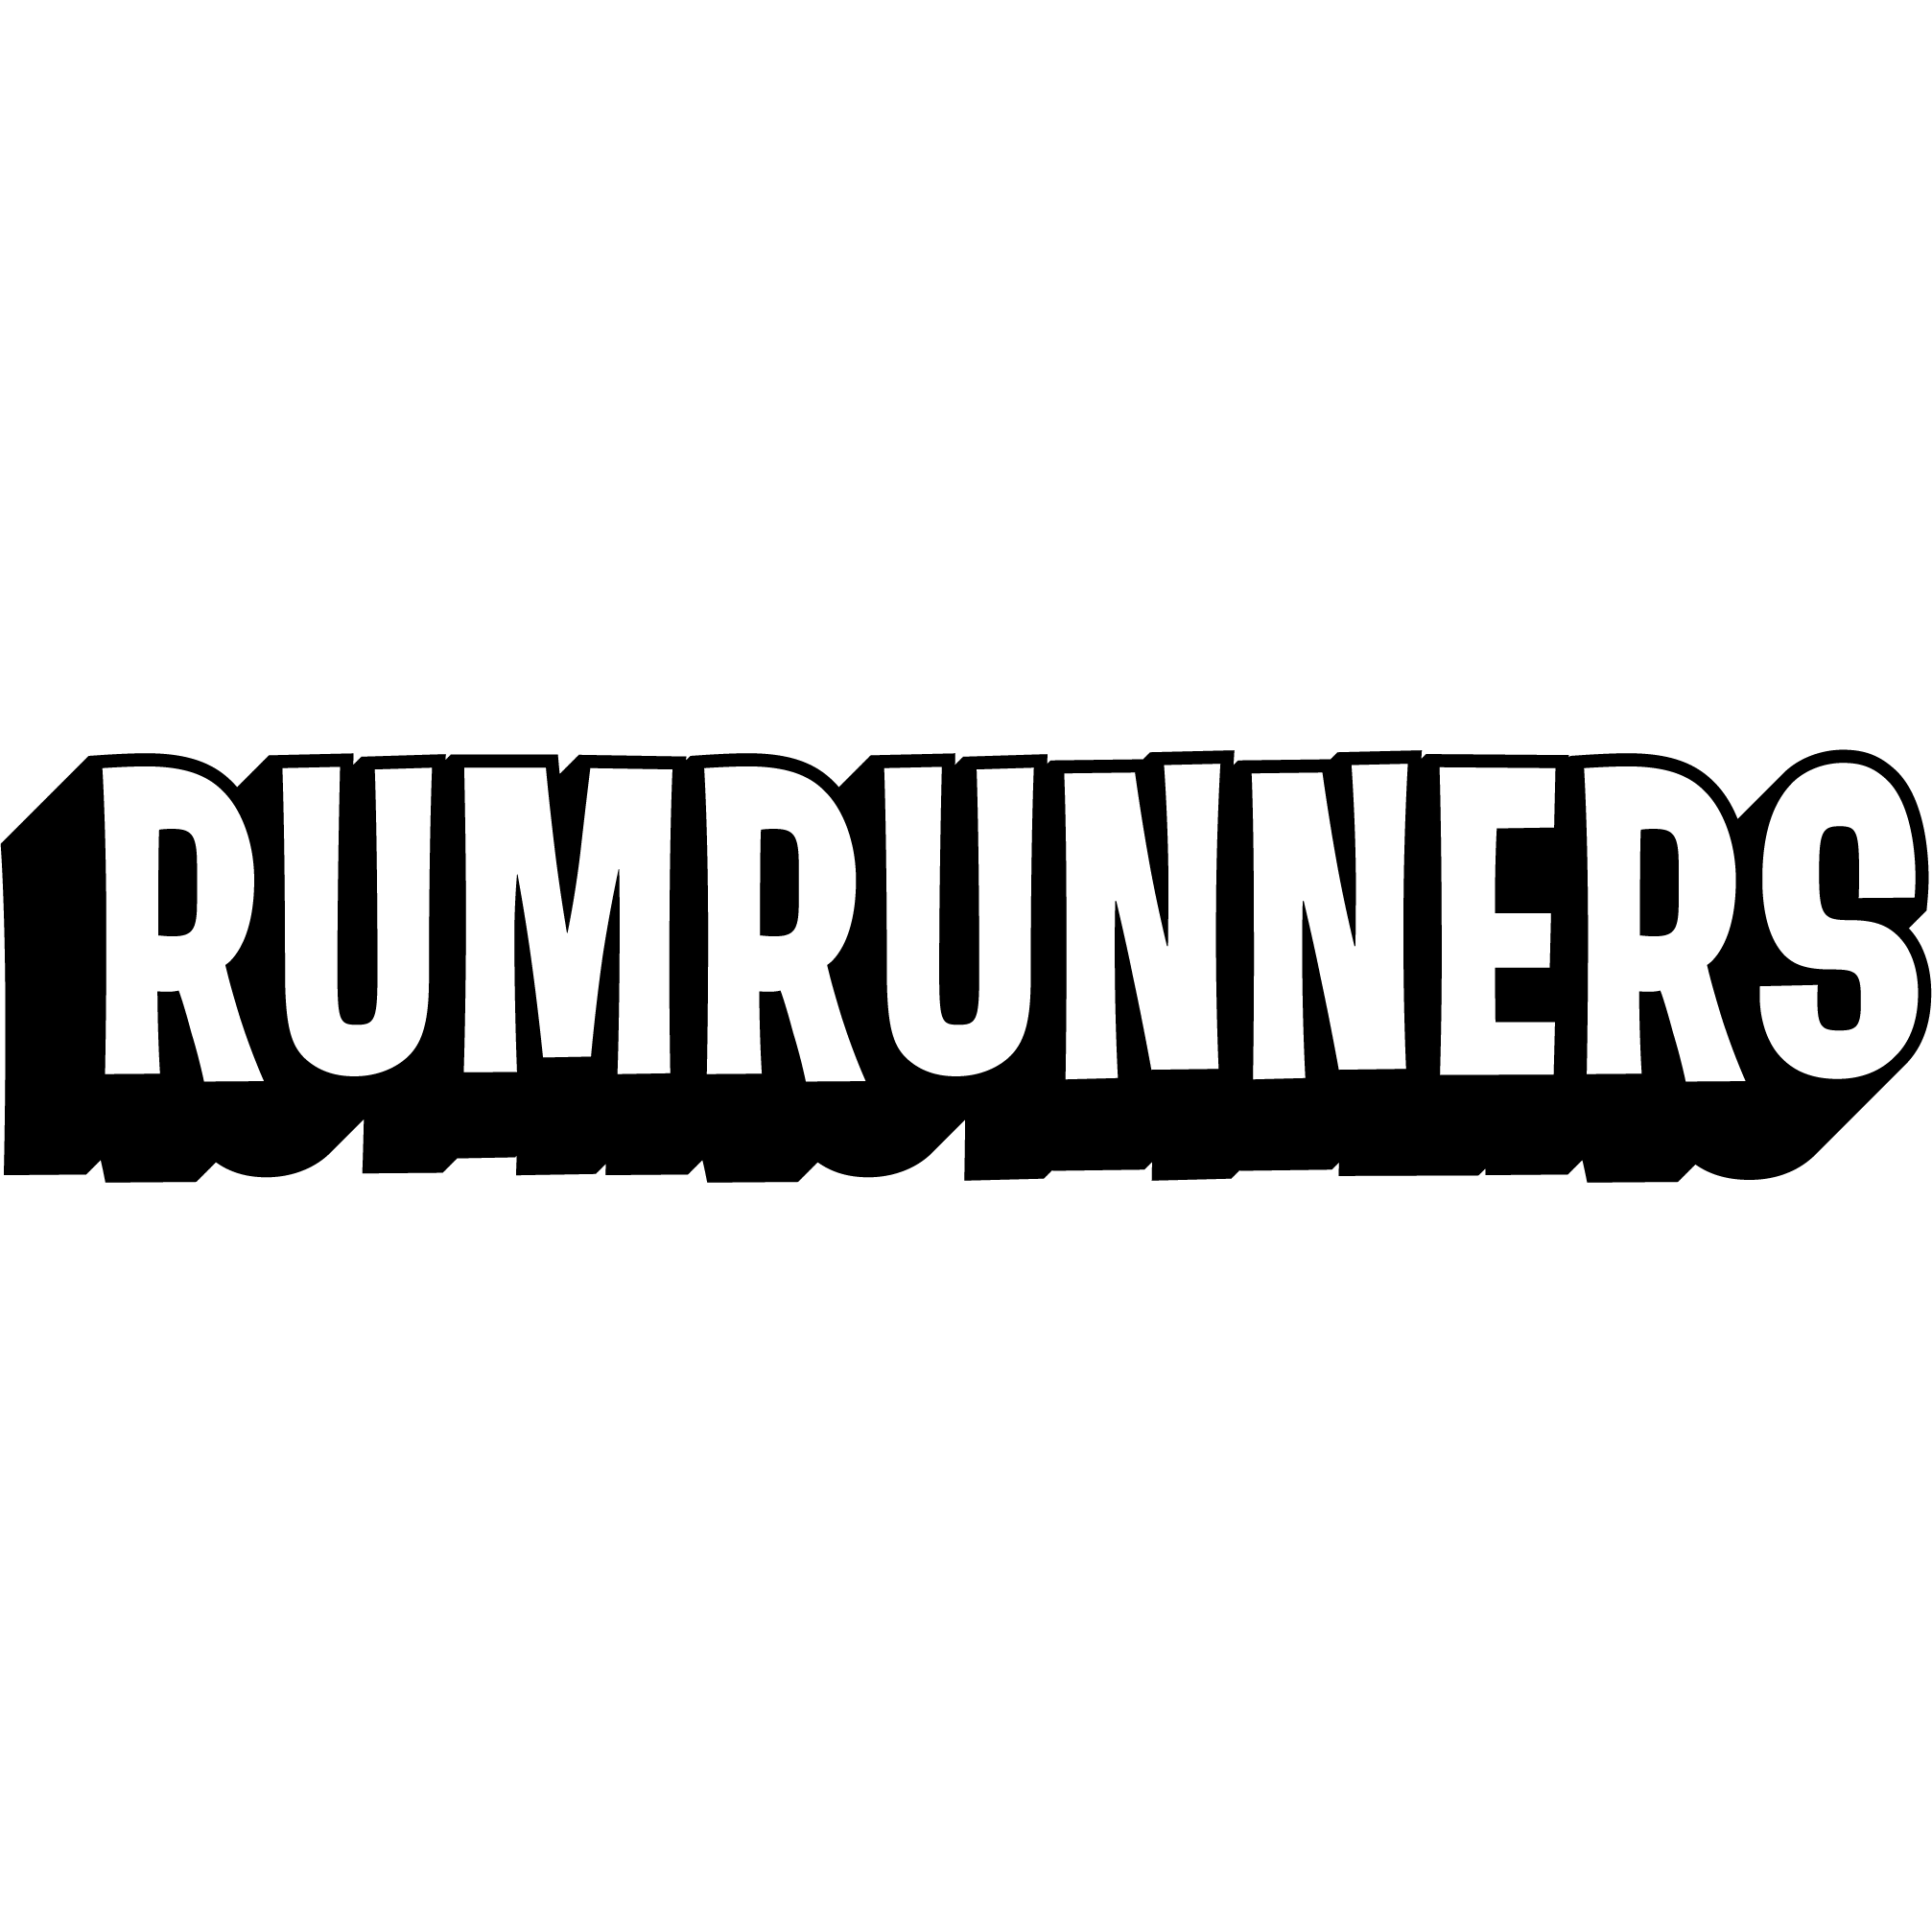 Rum Runners - Cleveland, OH 44113 - (216)523-1501 | ShowMeLocal.com